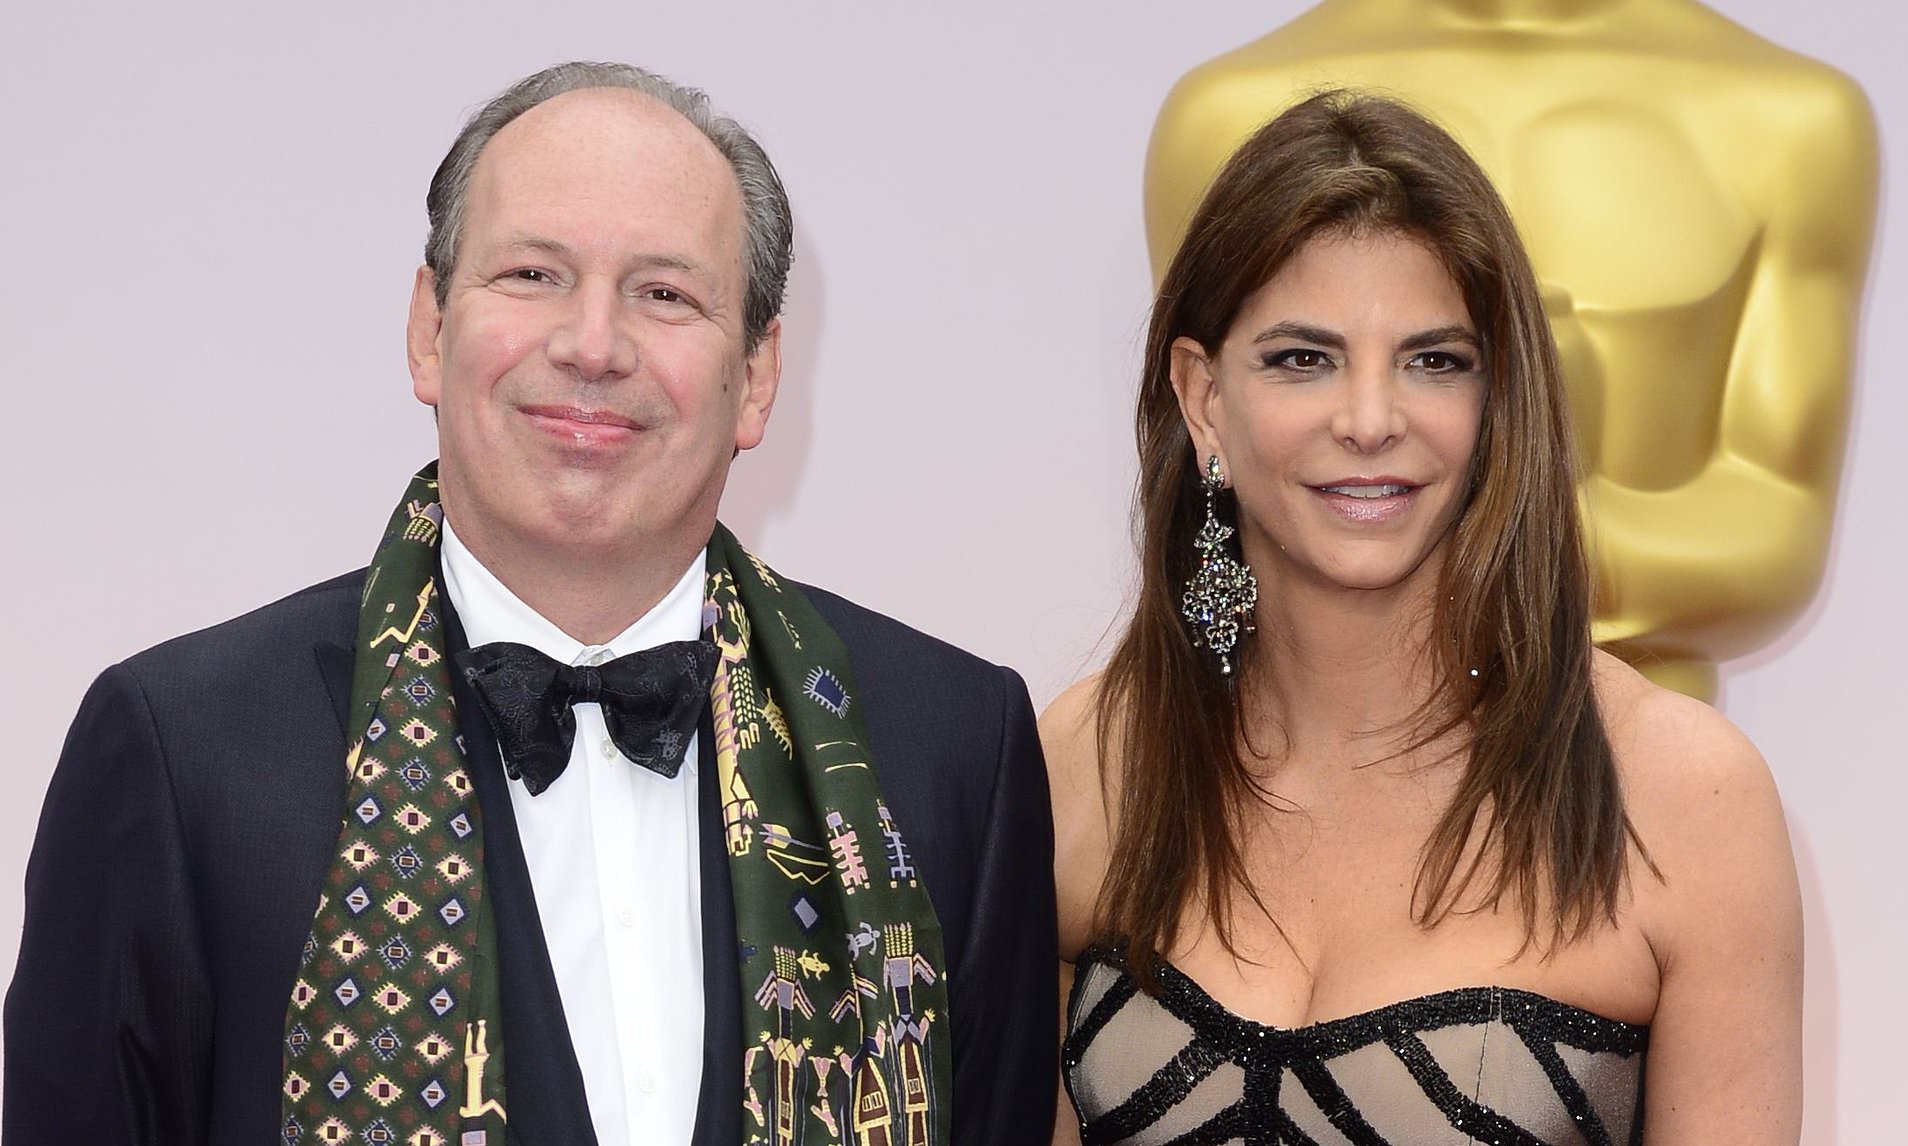 Hans Zimmer files for divorce from wife Suzanne